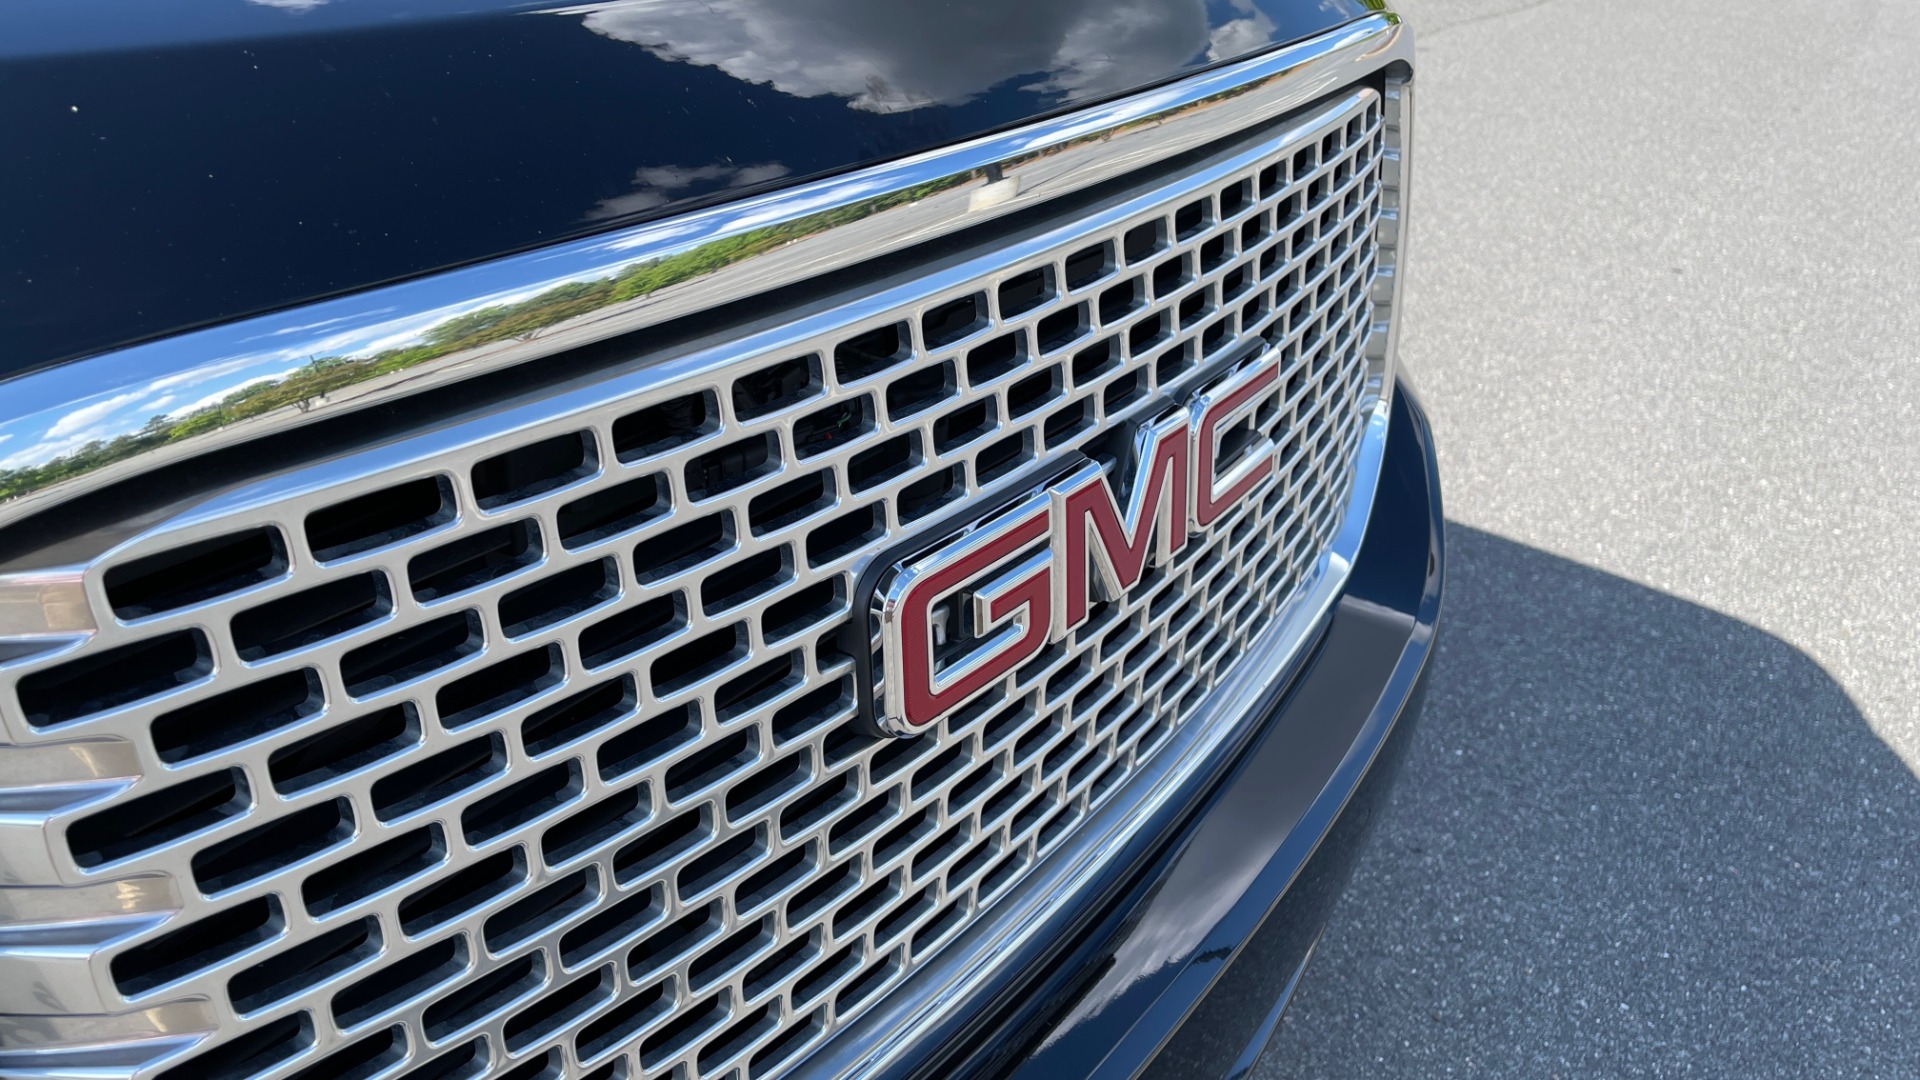 Used 2017 GMC YUKON DENALI 4WD / OPEN ROAD / NAV / ENTERTAINMENT / SUNROOF / ADAPT CRUISE for sale Sold at Formula Imports in Charlotte NC 28227 17